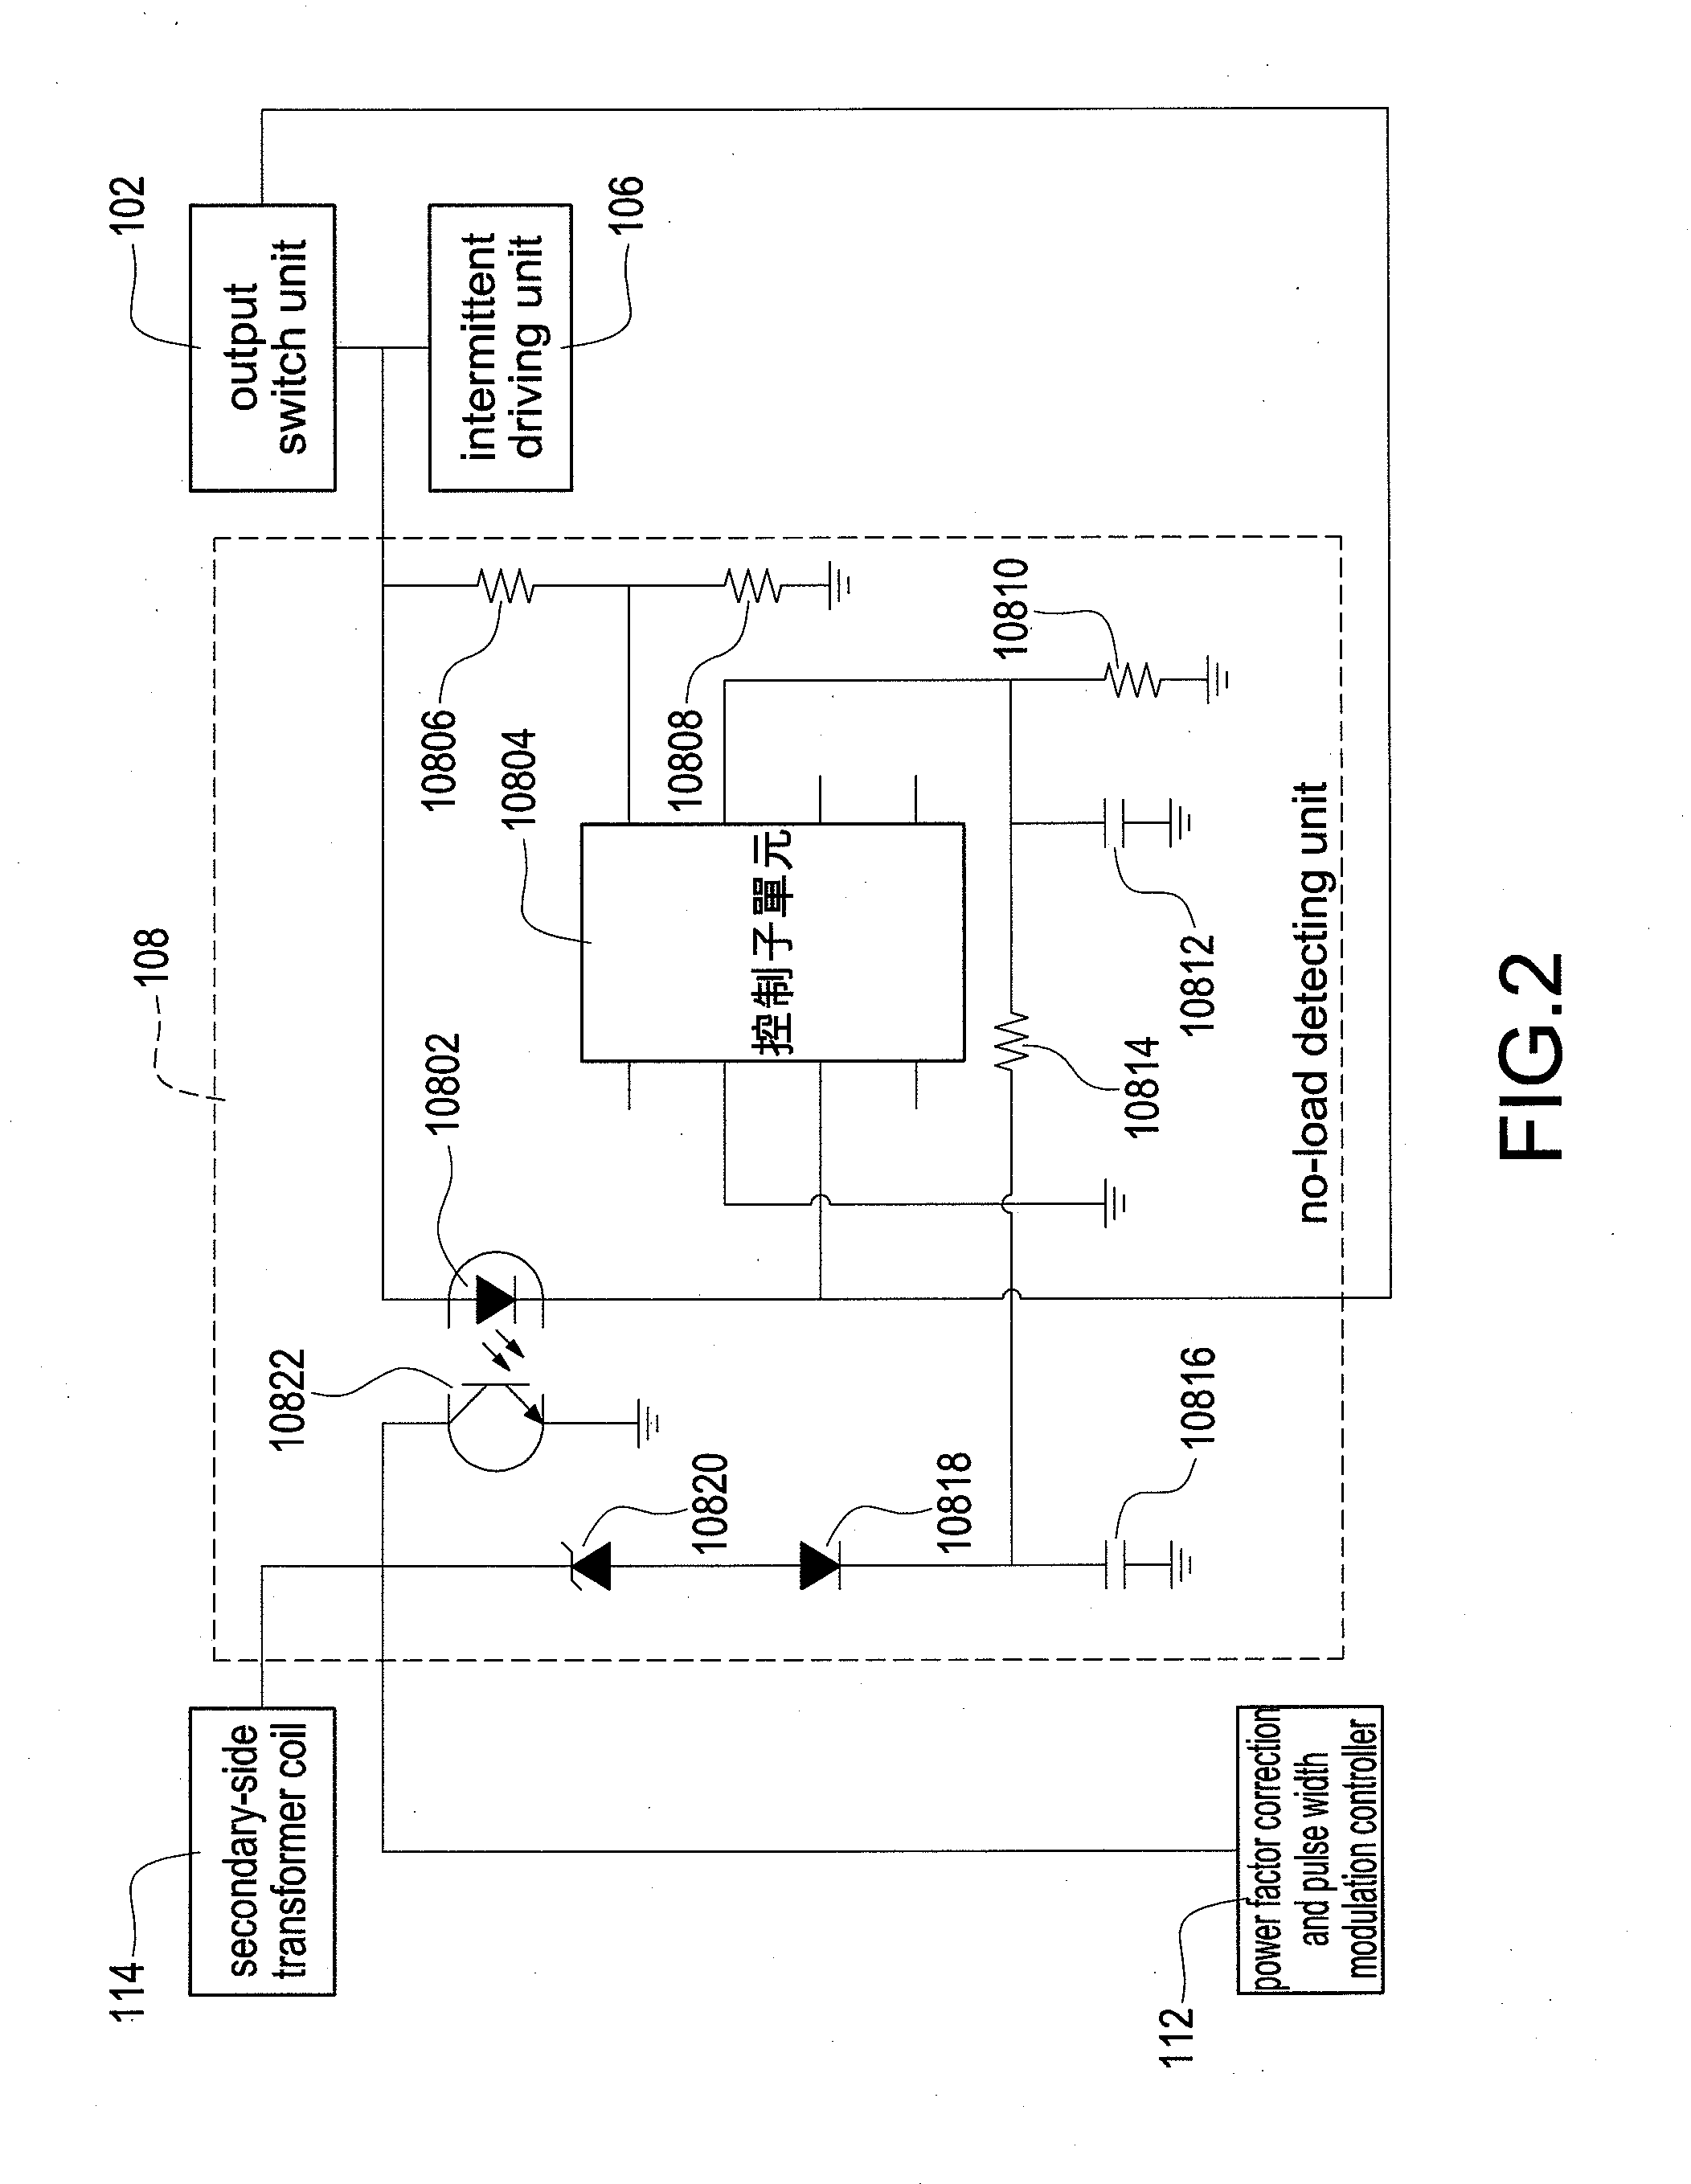 Power supply apparatus with low standby power consumption